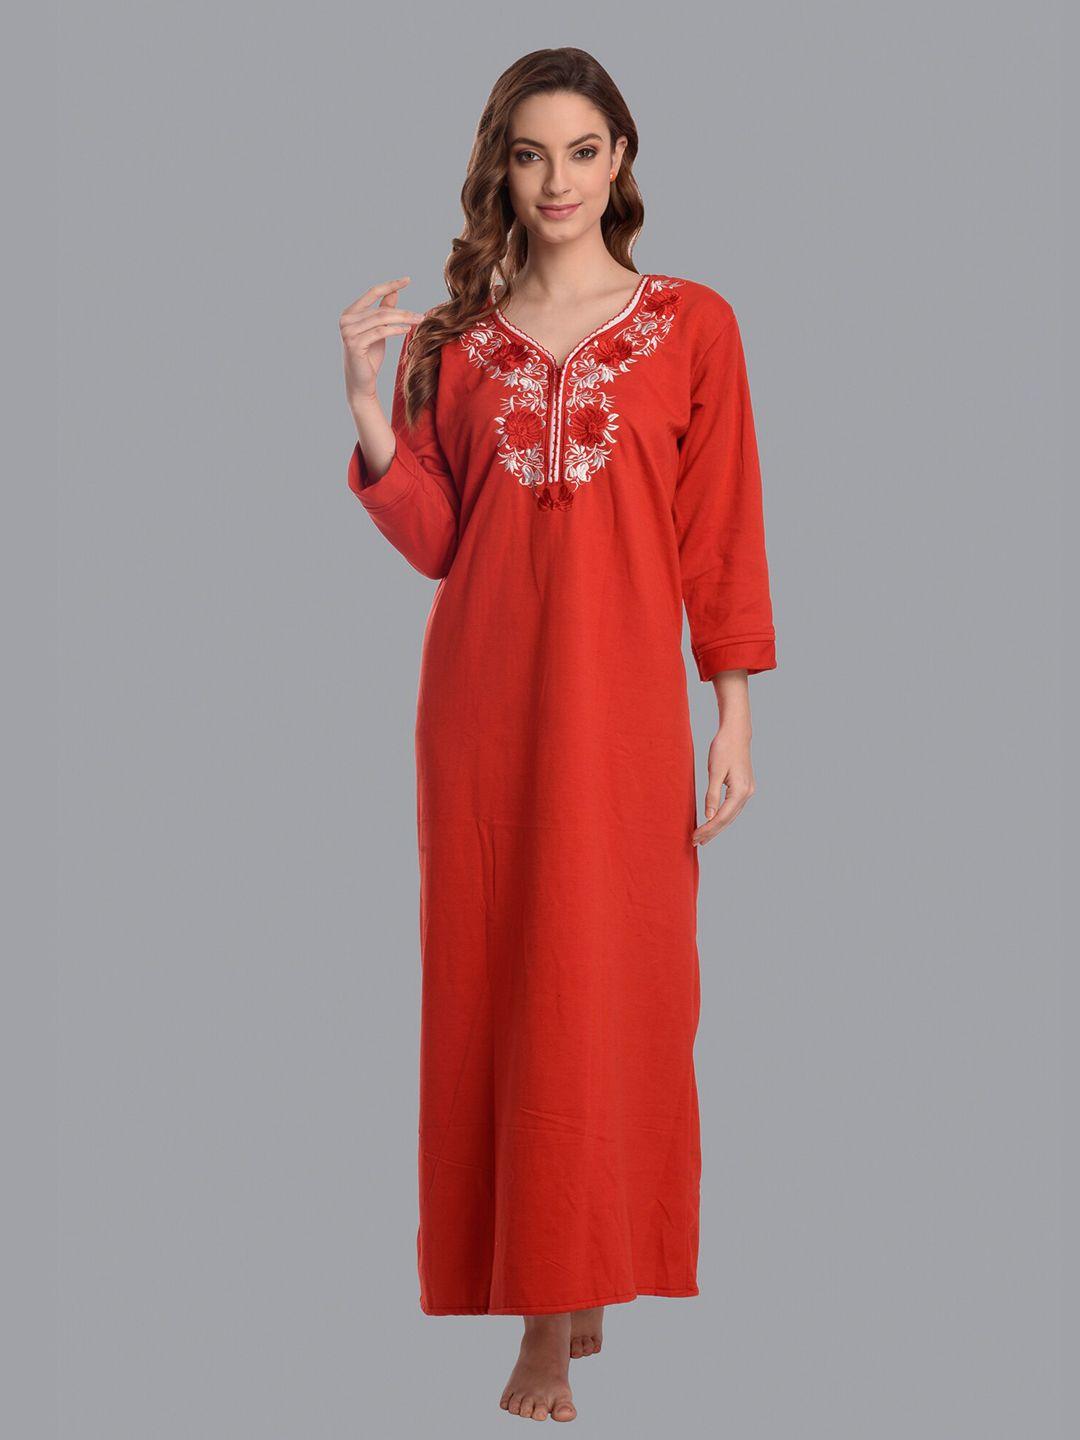 cierge red embroidered maxi nightdress